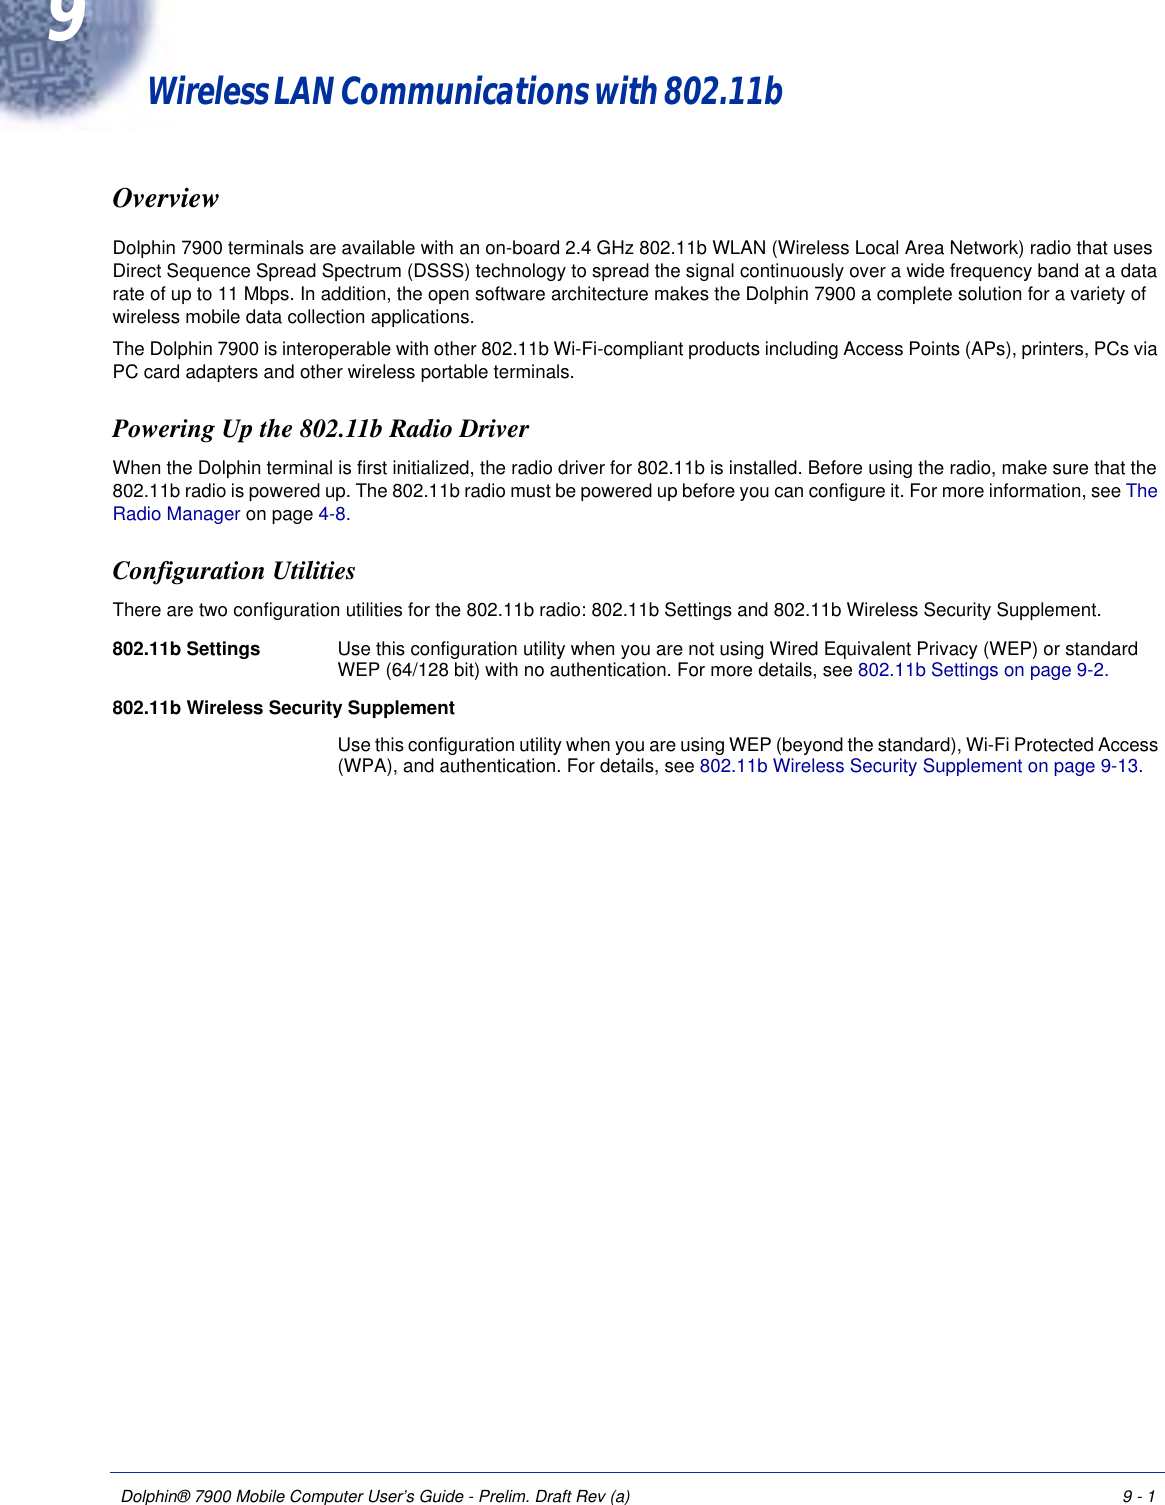 Dolphin® 7900 Mobile Computer User’s Guide - Prelim. Draft Rev (a) 9 - 19Wireless LAN Communications with 802.11b OverviewDolphin 7900 terminals are available with an on-board 2.4 GHz 802.11b WLAN (Wireless Local Area Network) radio that uses Direct Sequence Spread Spectrum (DSSS) technology to spread the signal continuously over a wide frequency band at a data rate of up to 11 Mbps. In addition, the open software architecture makes the Dolphin 7900 a complete solution for a variety of wireless mobile data collection applications.The Dolphin 7900 is interoperable with other 802.11b Wi-Fi-compliant products including Access Points (APs), printers, PCs via PC card adapters and other wireless portable terminals.Powering Up the 802.11b Radio DriverWhen the Dolphin terminal is first initialized, the radio driver for 802.11b is installed. Before using the radio, make sure that the 802.11b radio is powered up. The 802.11b radio must be powered up before you can configure it. For more information, see The Radio Manager on page 4-8.Configuration UtilitiesThere are two configuration utilities for the 802.11b radio: 802.11b Settings and 802.11b Wireless Security Supplement.802.11b Settings Use this configuration utility when you are not using Wired Equivalent Privacy (WEP) or standard WEP (64/128 bit) with no authentication. For more details, see 802.11b Settings on page 9-2.802.11b Wireless Security SupplementUse this configuration utility when you are using WEP (beyond the standard), Wi-Fi Protected Access (WPA), and authentication. For details, see 802.11b Wireless Security Supplement on page 9-13.